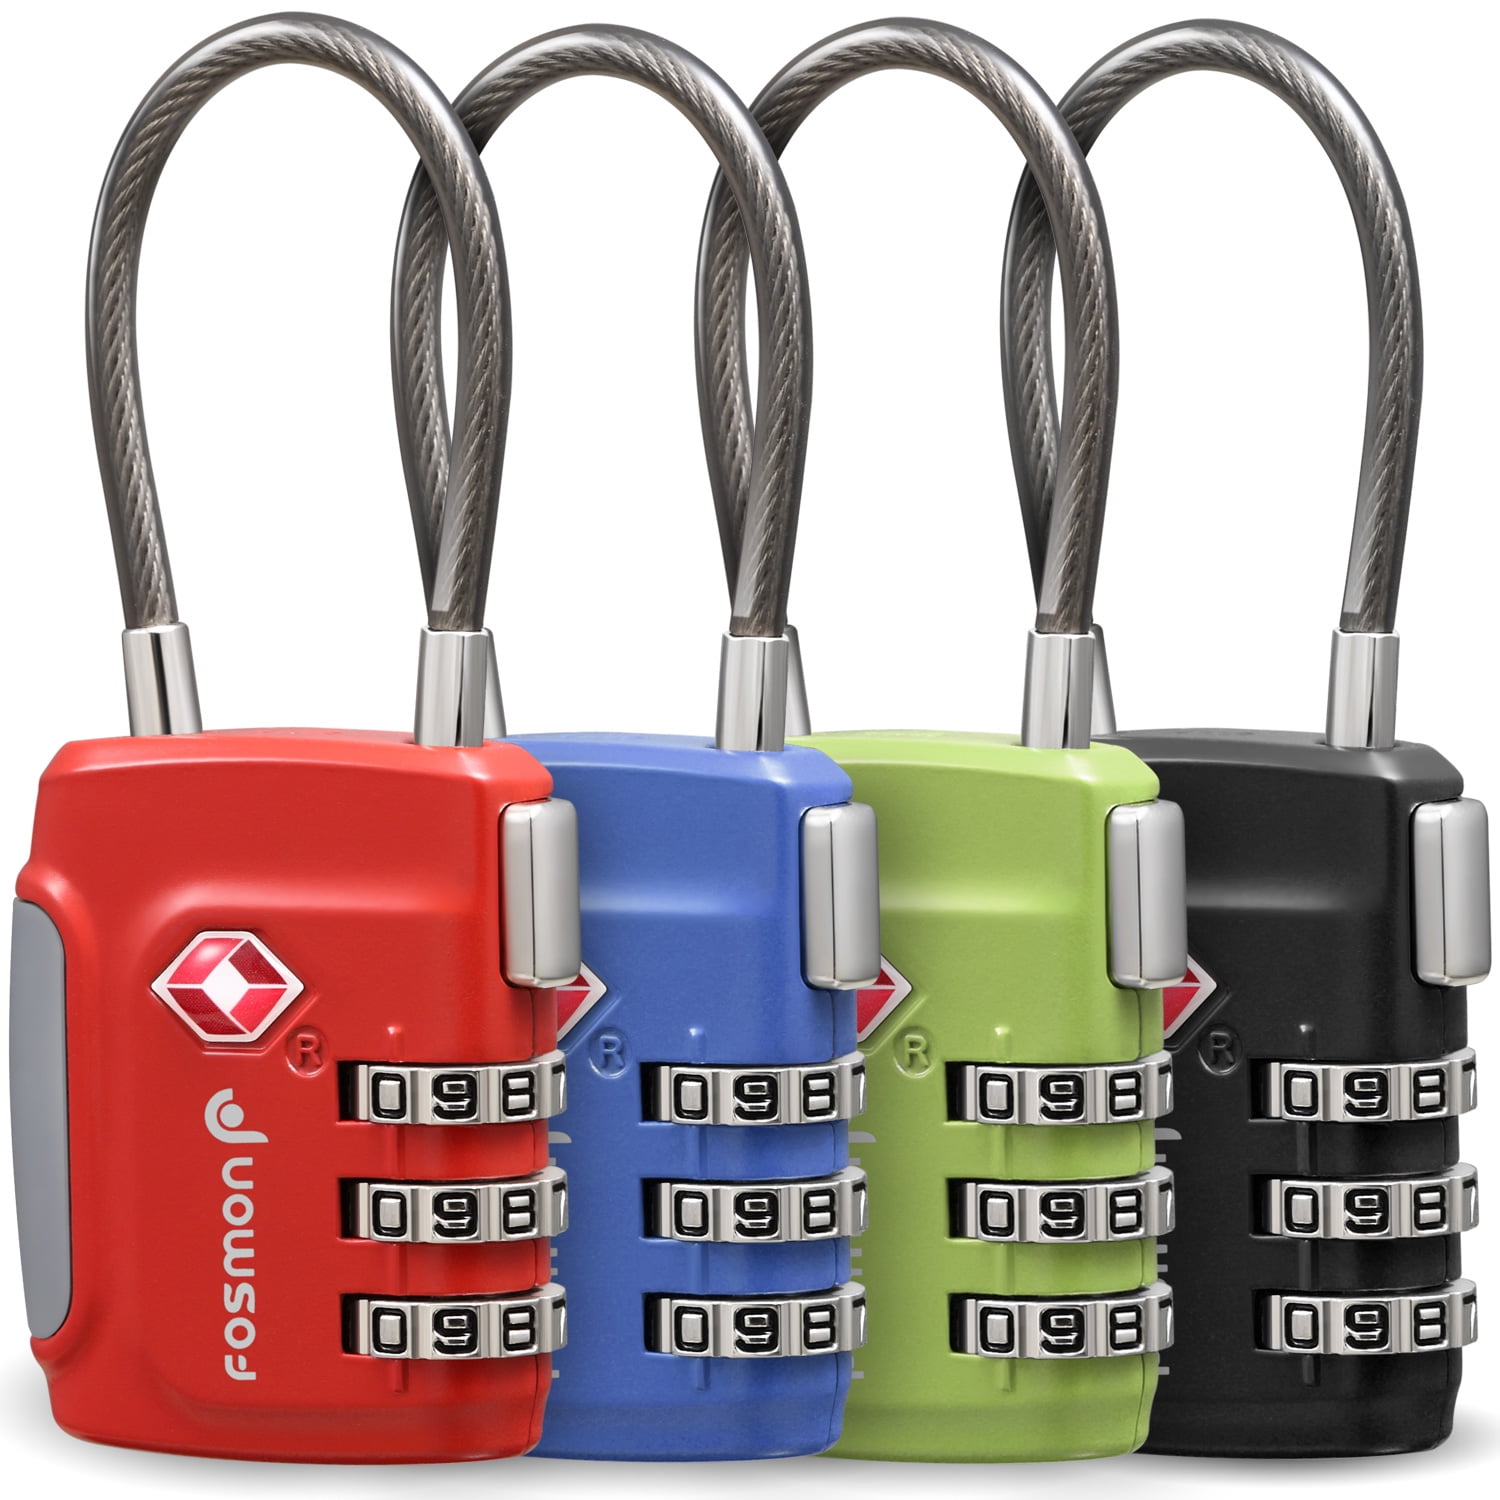 Mini 3 Digit Number Combination Luggage Suitcase Security Cable Lock Padlock Hot 